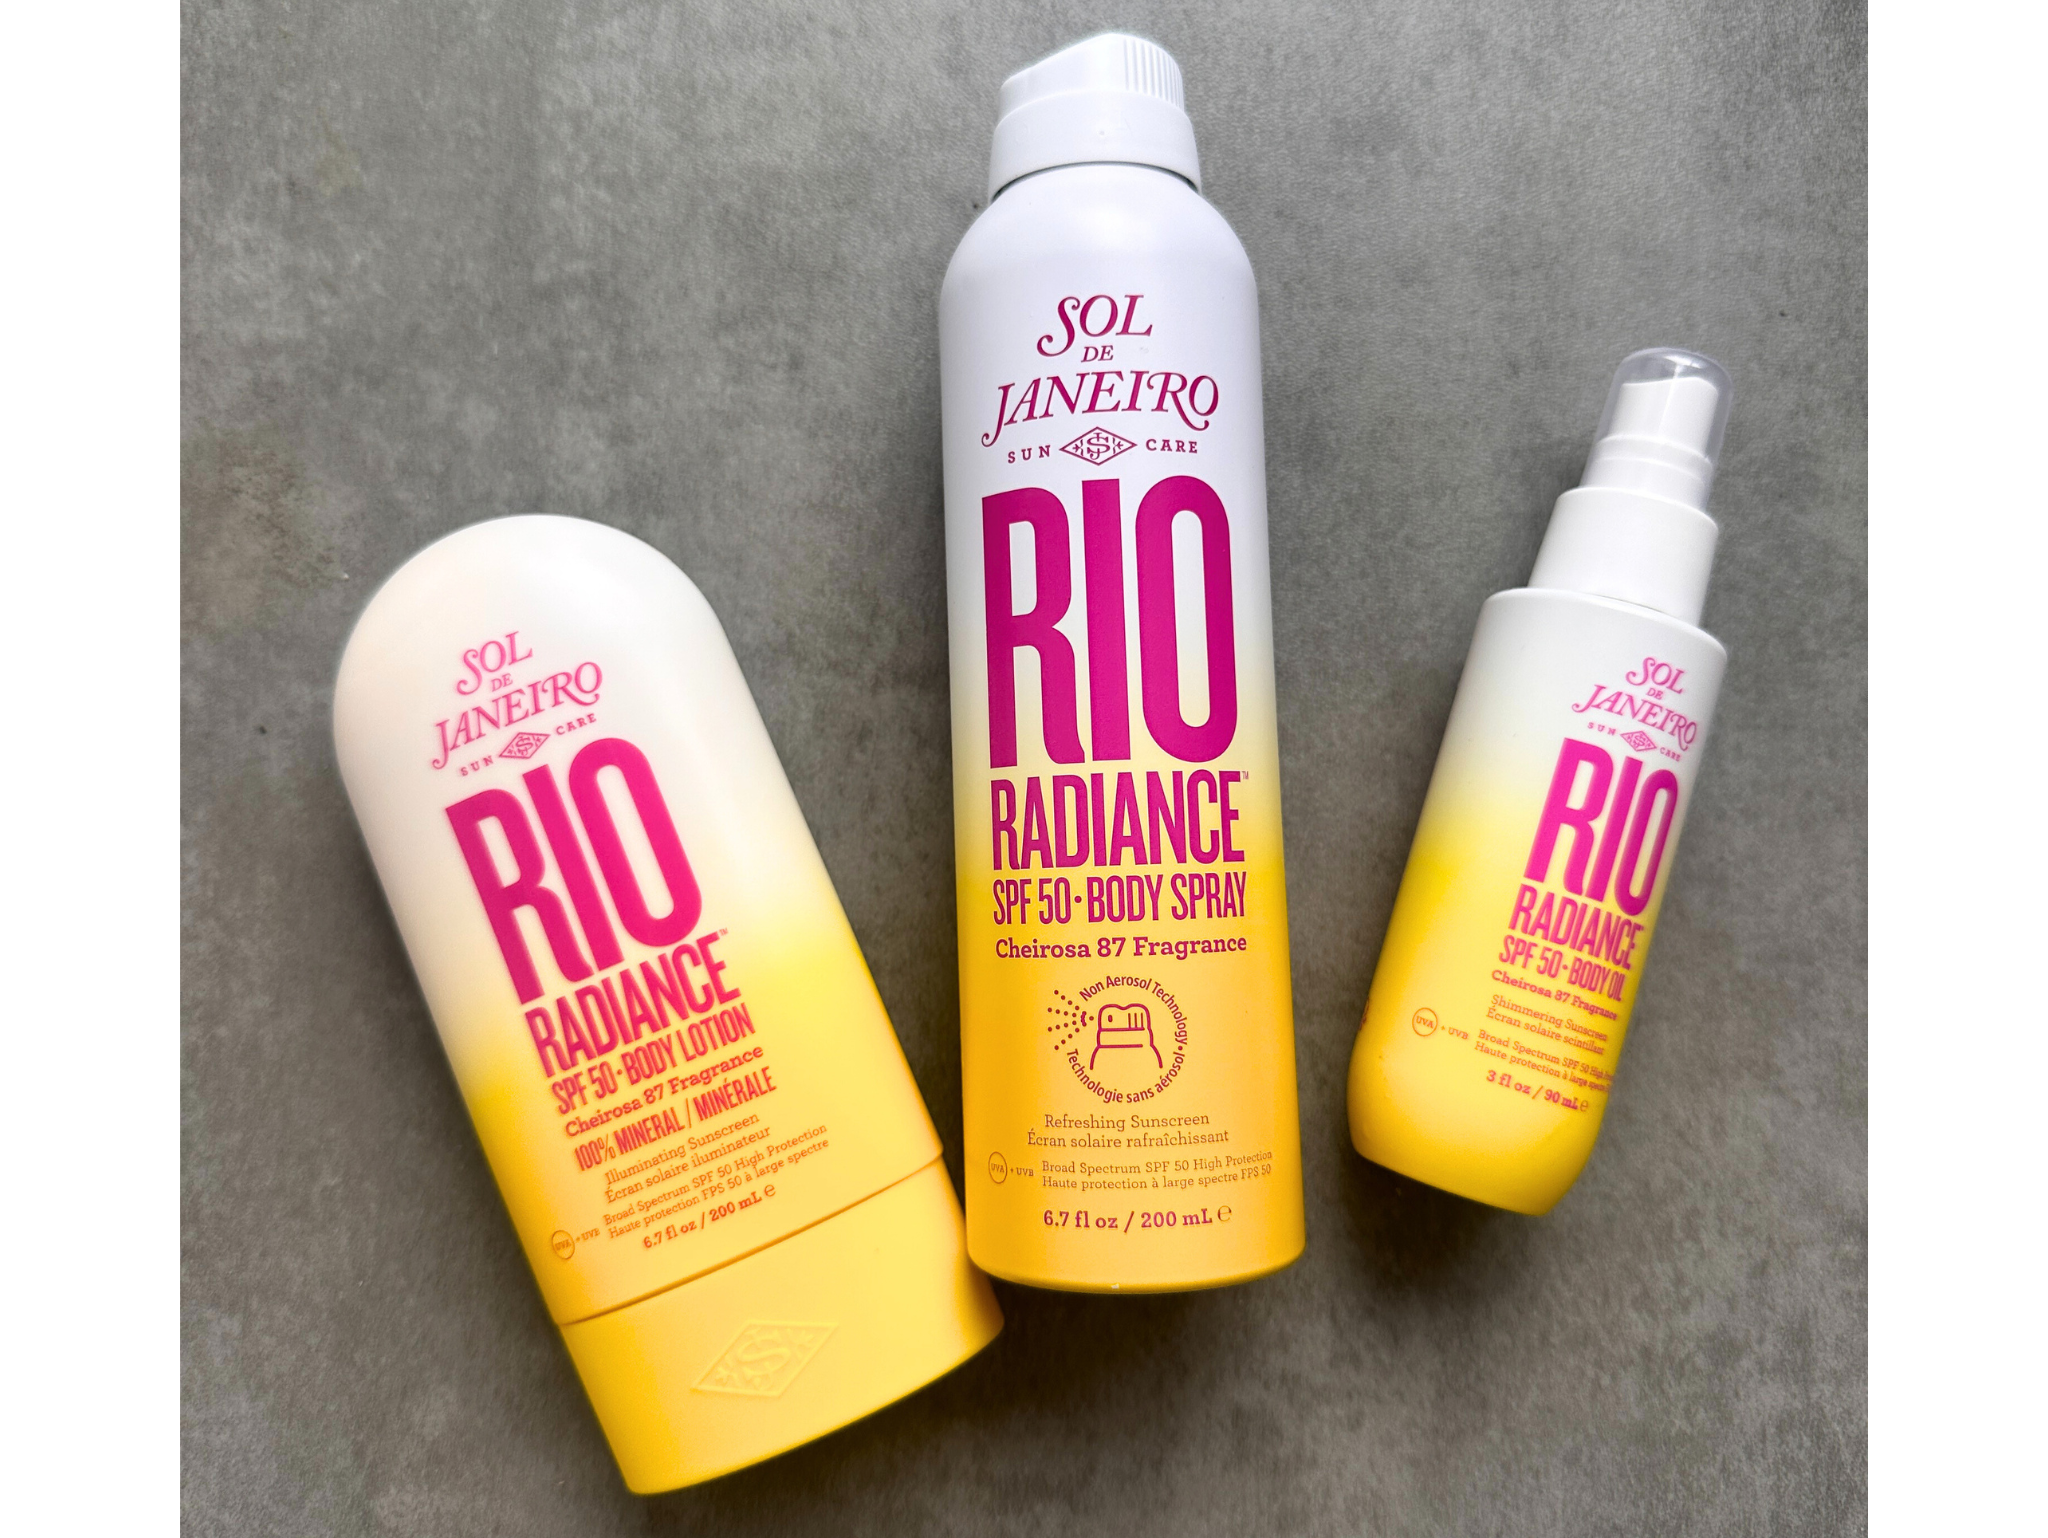 I put the Rio radiance SPF 50 body lotion, spray and oil to the test